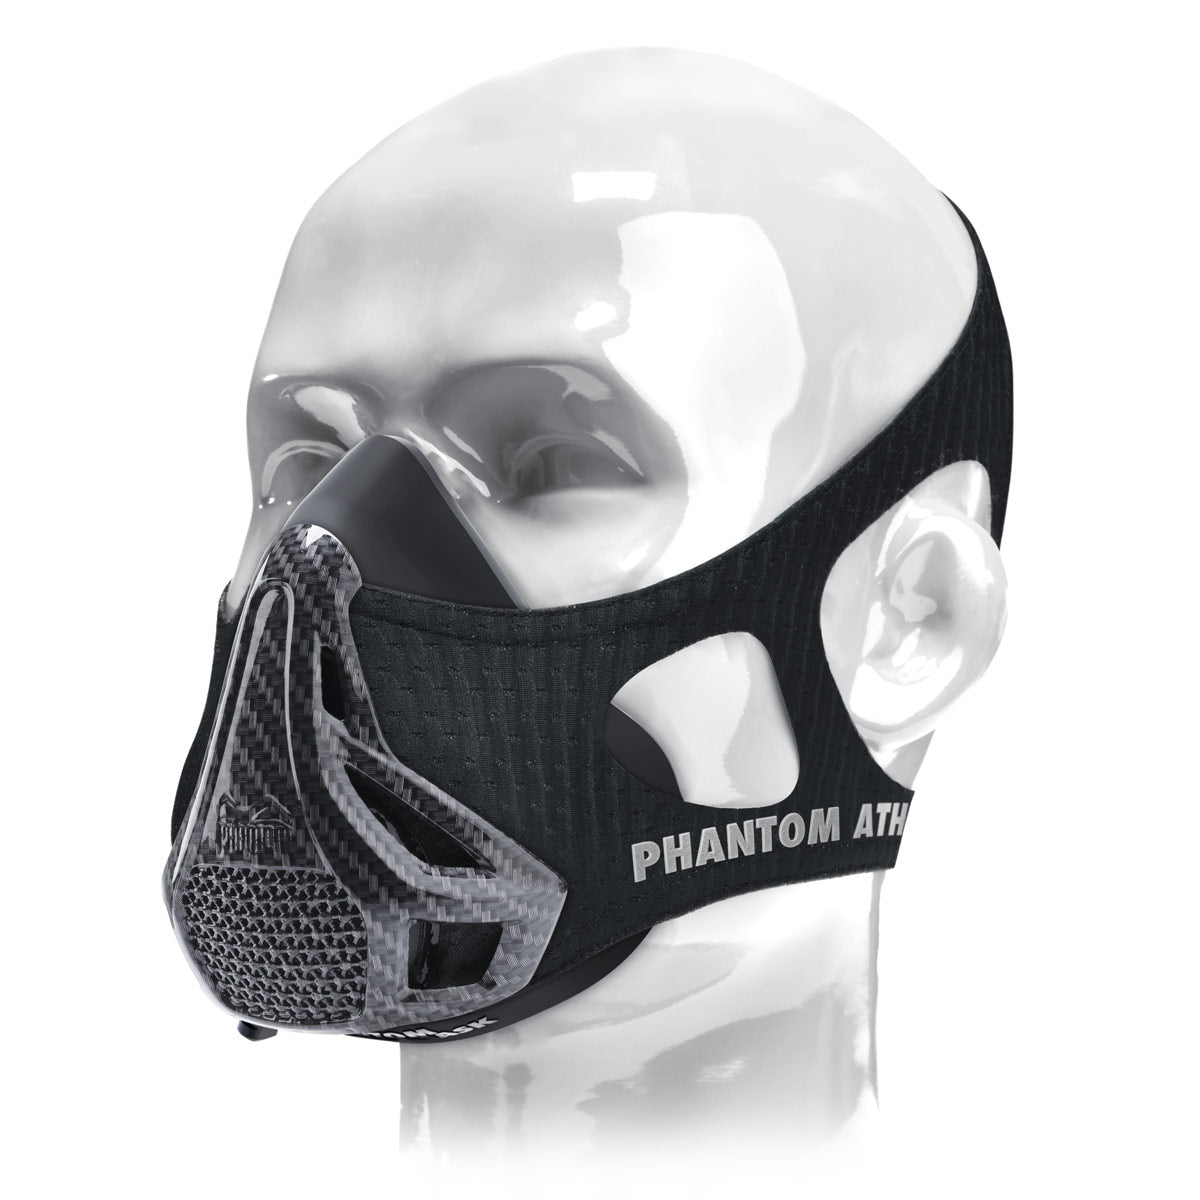 The Phantom training mask. The original. Patented and awarded to take your fitness to the next level. Now in the limited Carbon Edition.